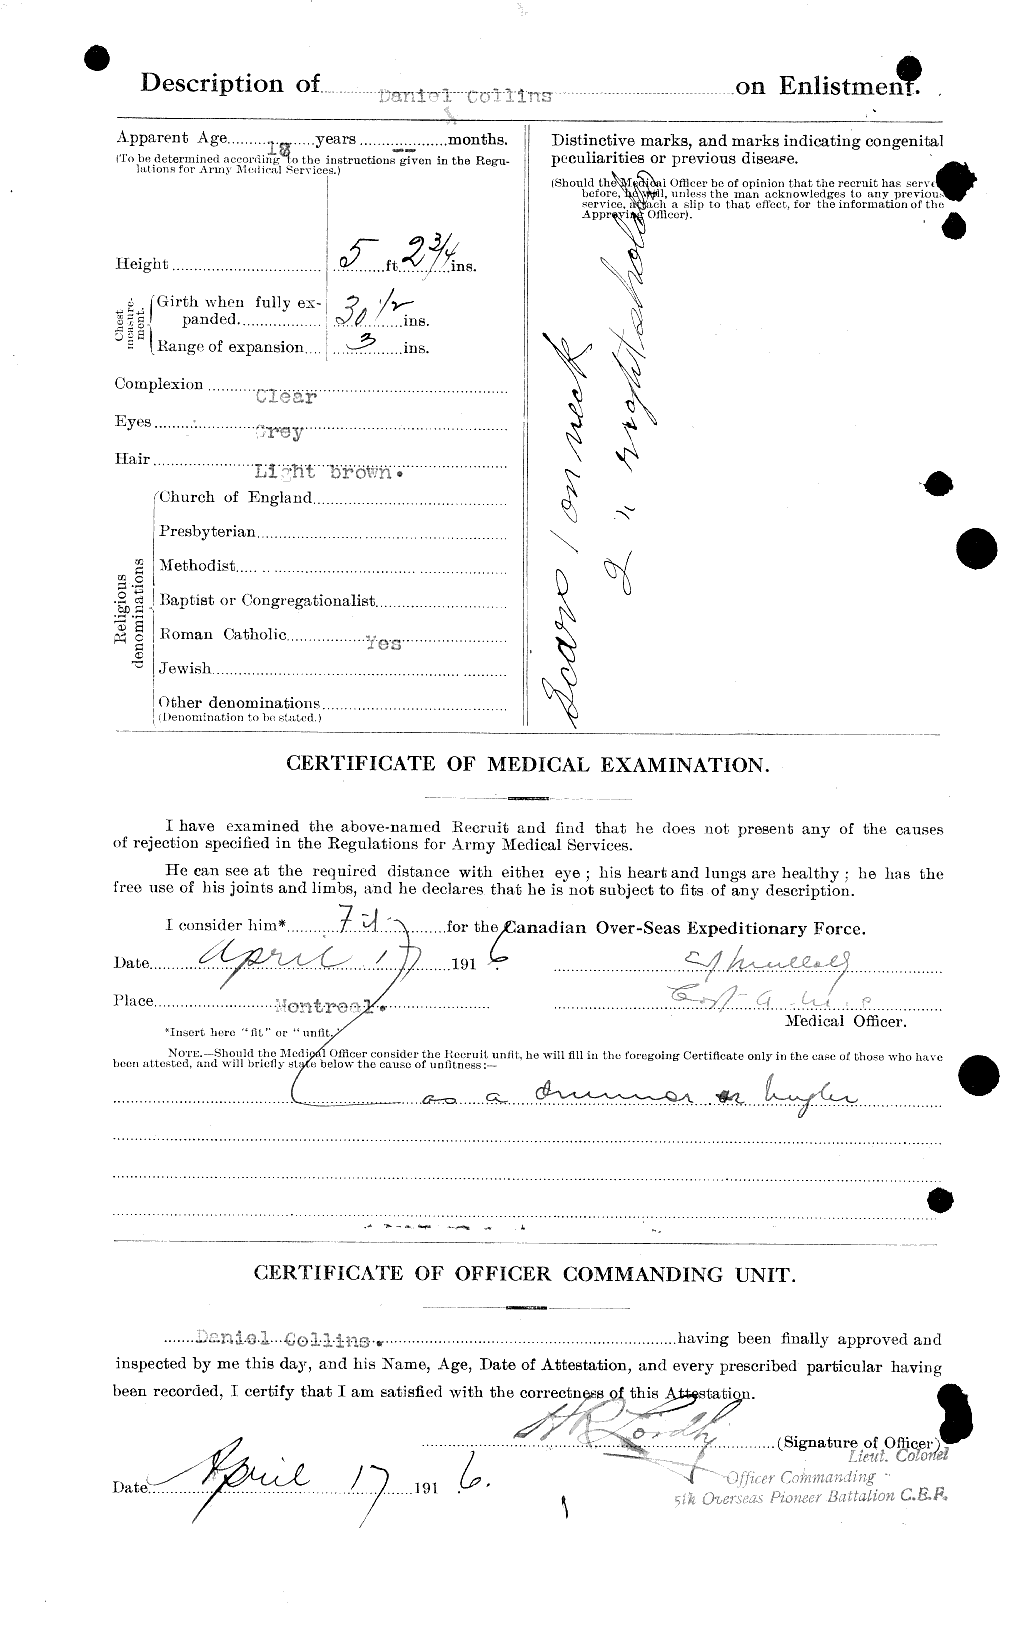 Personnel Records of the First World War - CEF 029066b